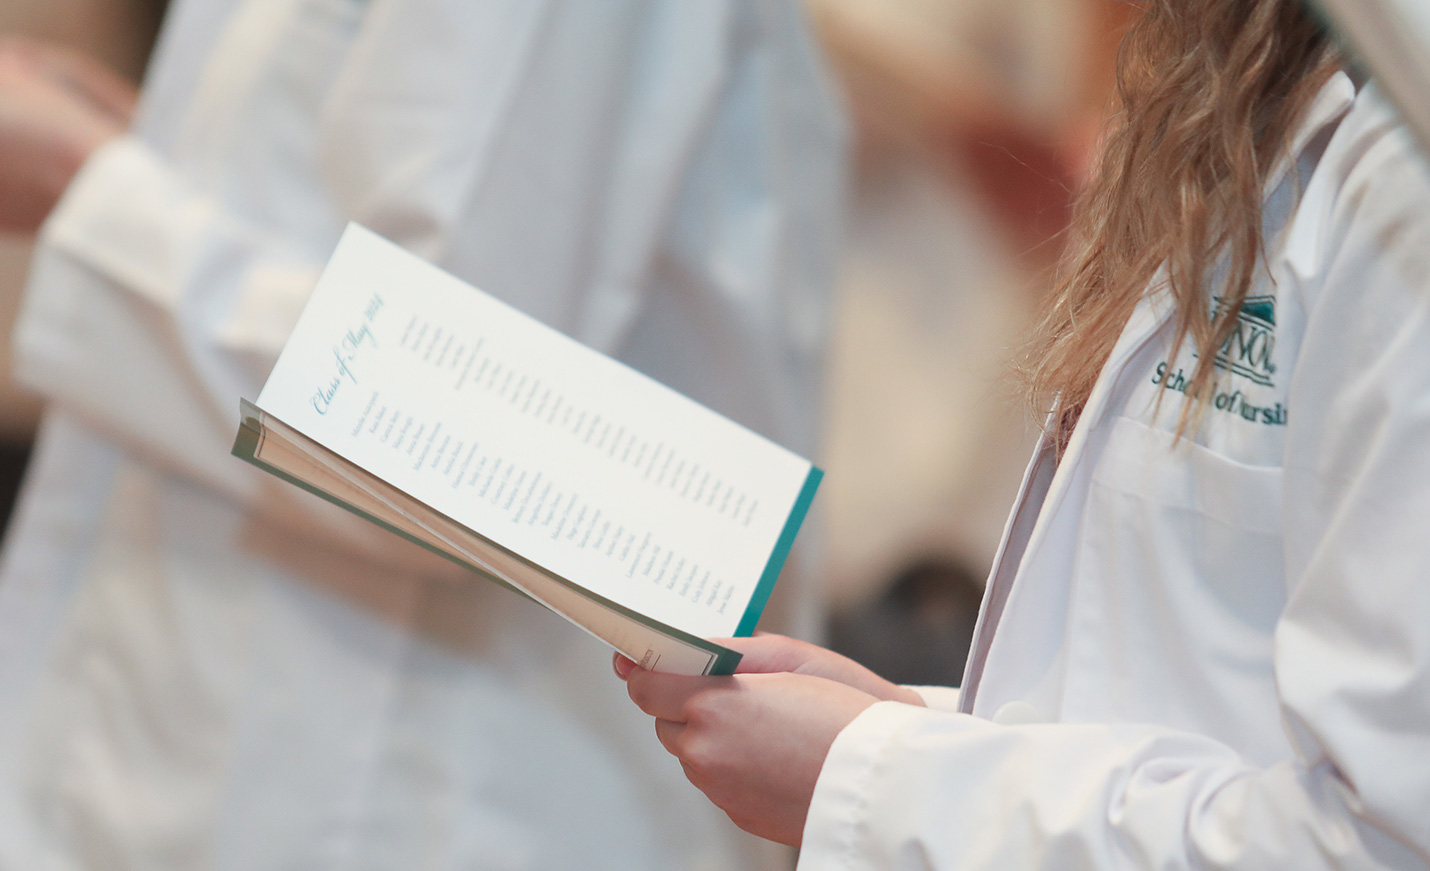 The hands of a nursing student holding the program while wearing their white coat during the White Coat Ceremony.